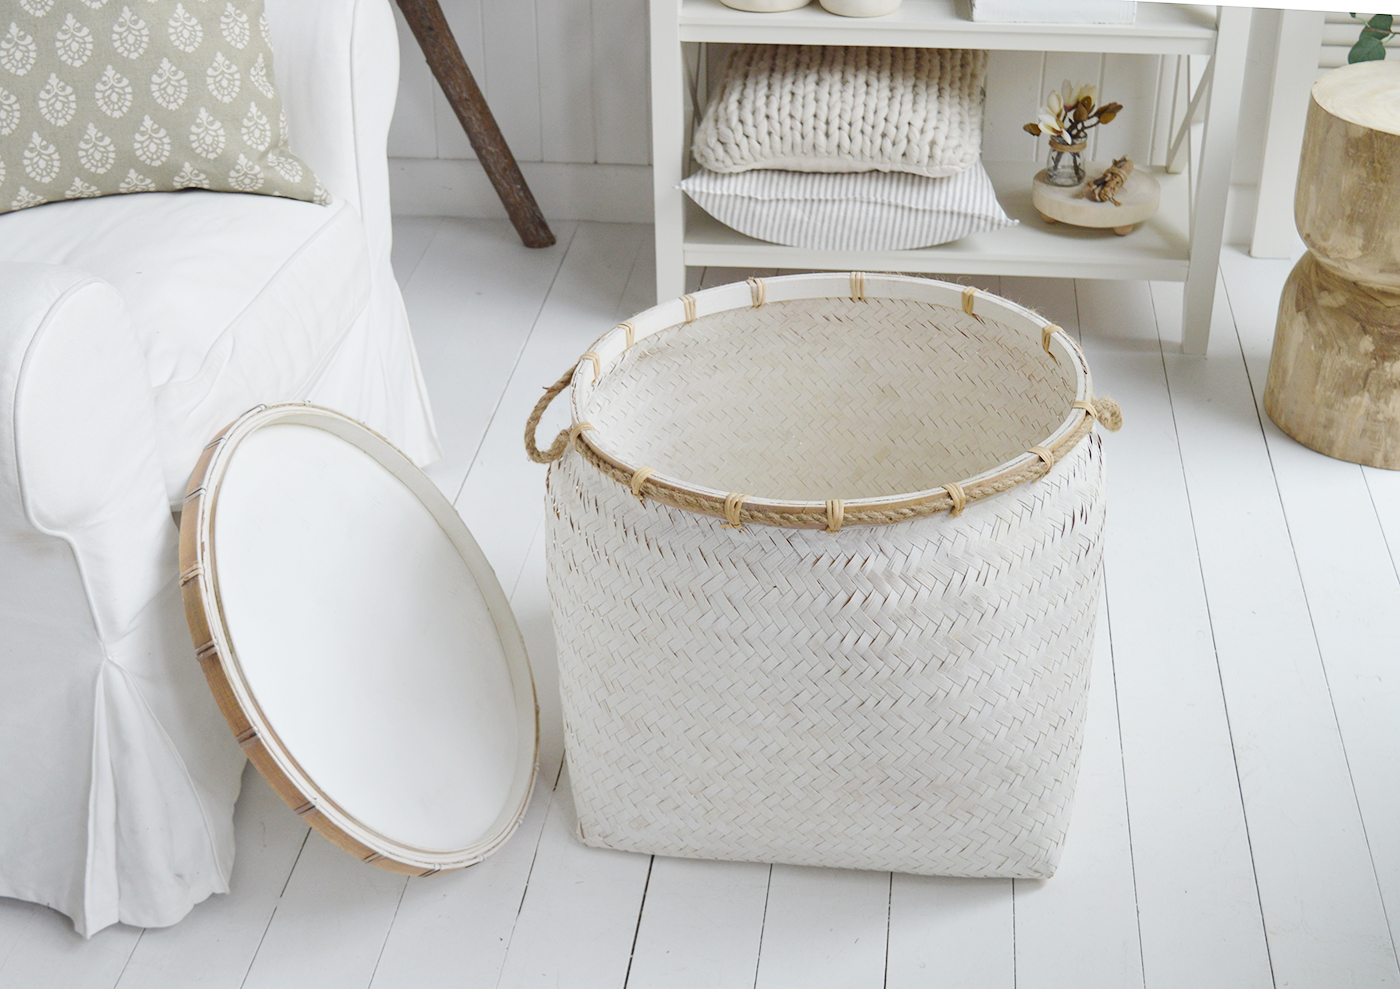 The rustic Nantucket white table basket with a lid ... coffee table, side table , laundry basket ...  such a versatile piece of coastal furniture which complements all our New England styles of interiors